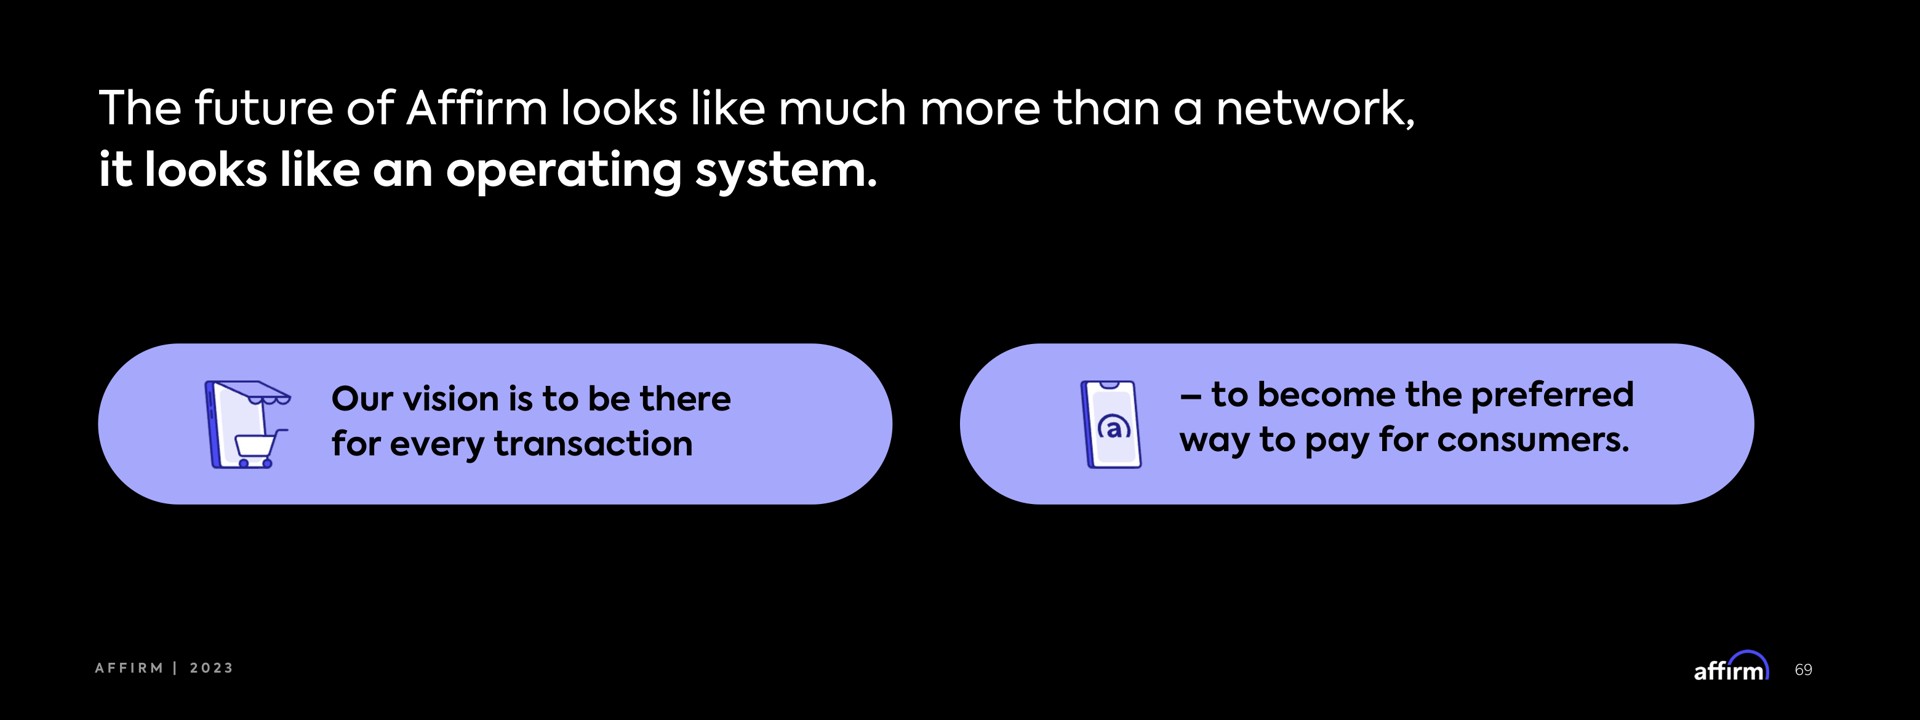 the future of affirm looks like much more than a network it looks like an operating system for every transaction to become preferred our vision is to be there | Affirm